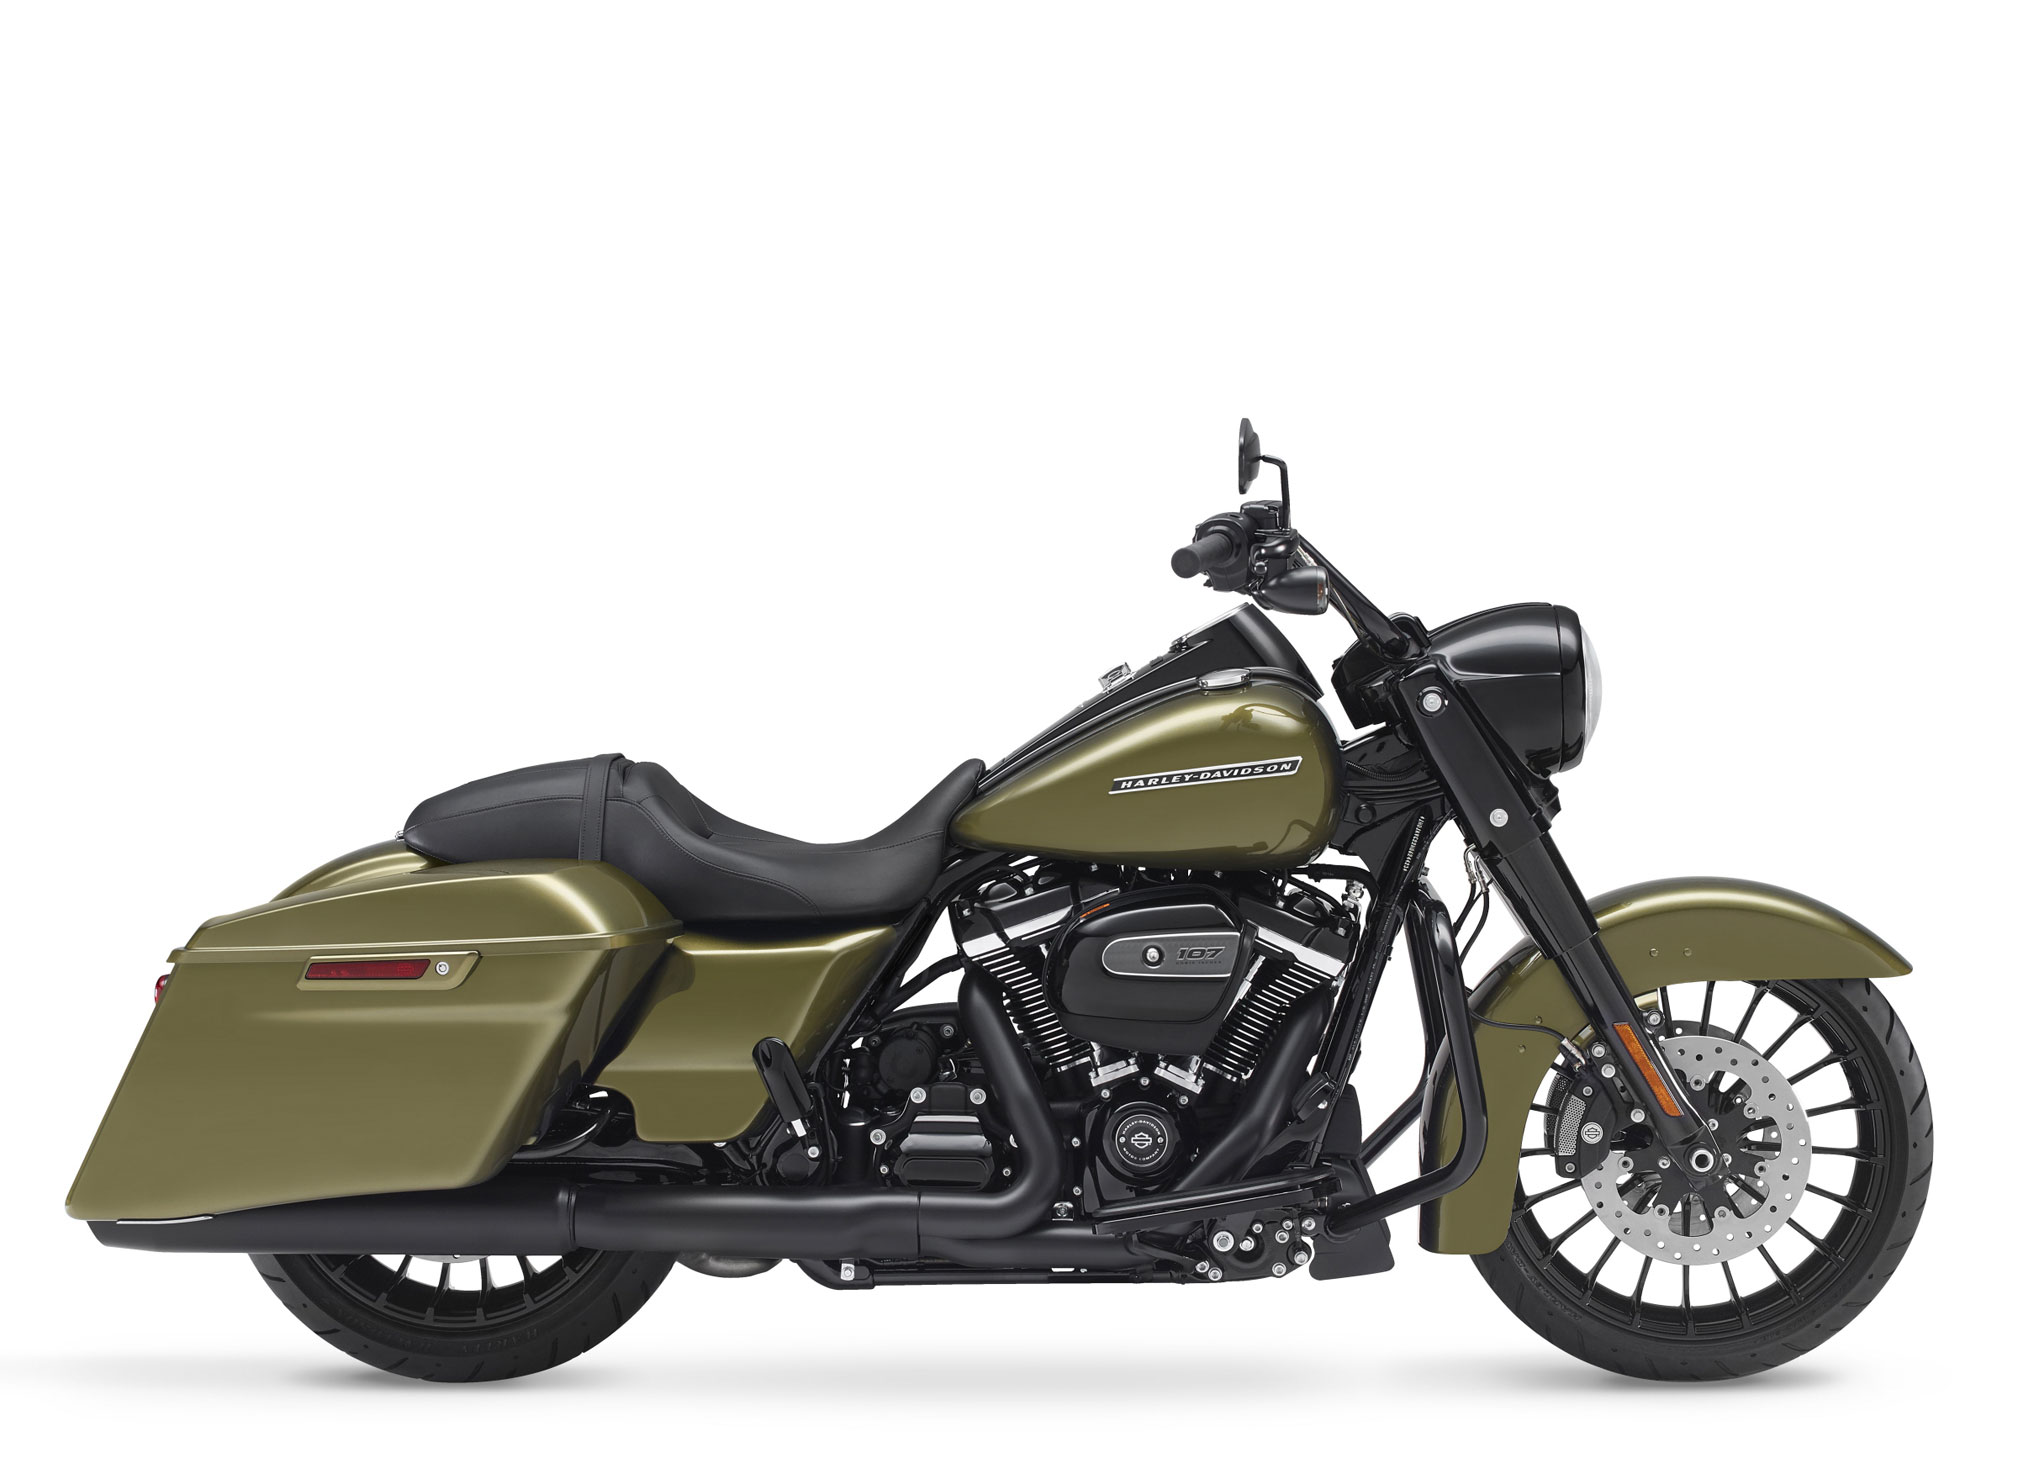  2019 Harley Davidson Road King Special Review Total 